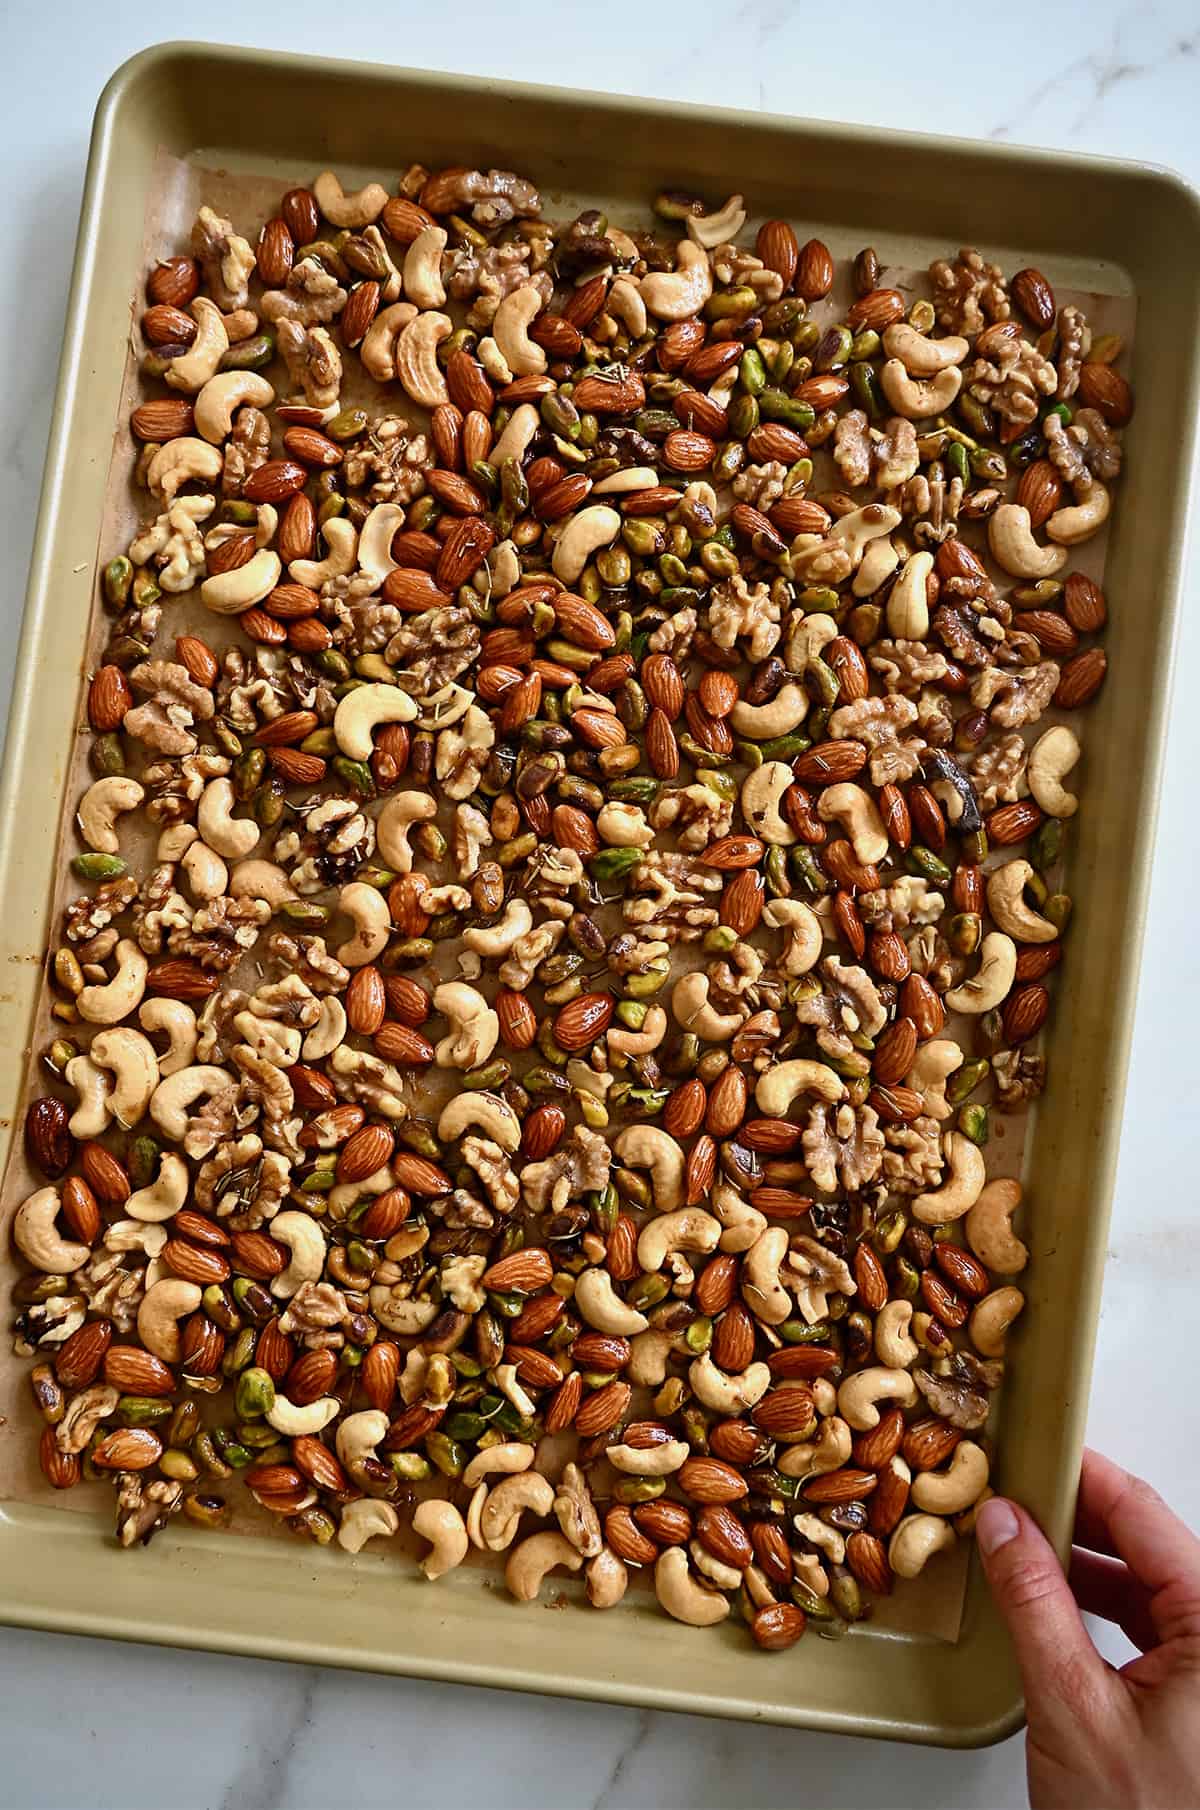 A person placing a baking sheet containing mixed nuts tossed with melted butter, spices and brown sugar onto a marble countertop.